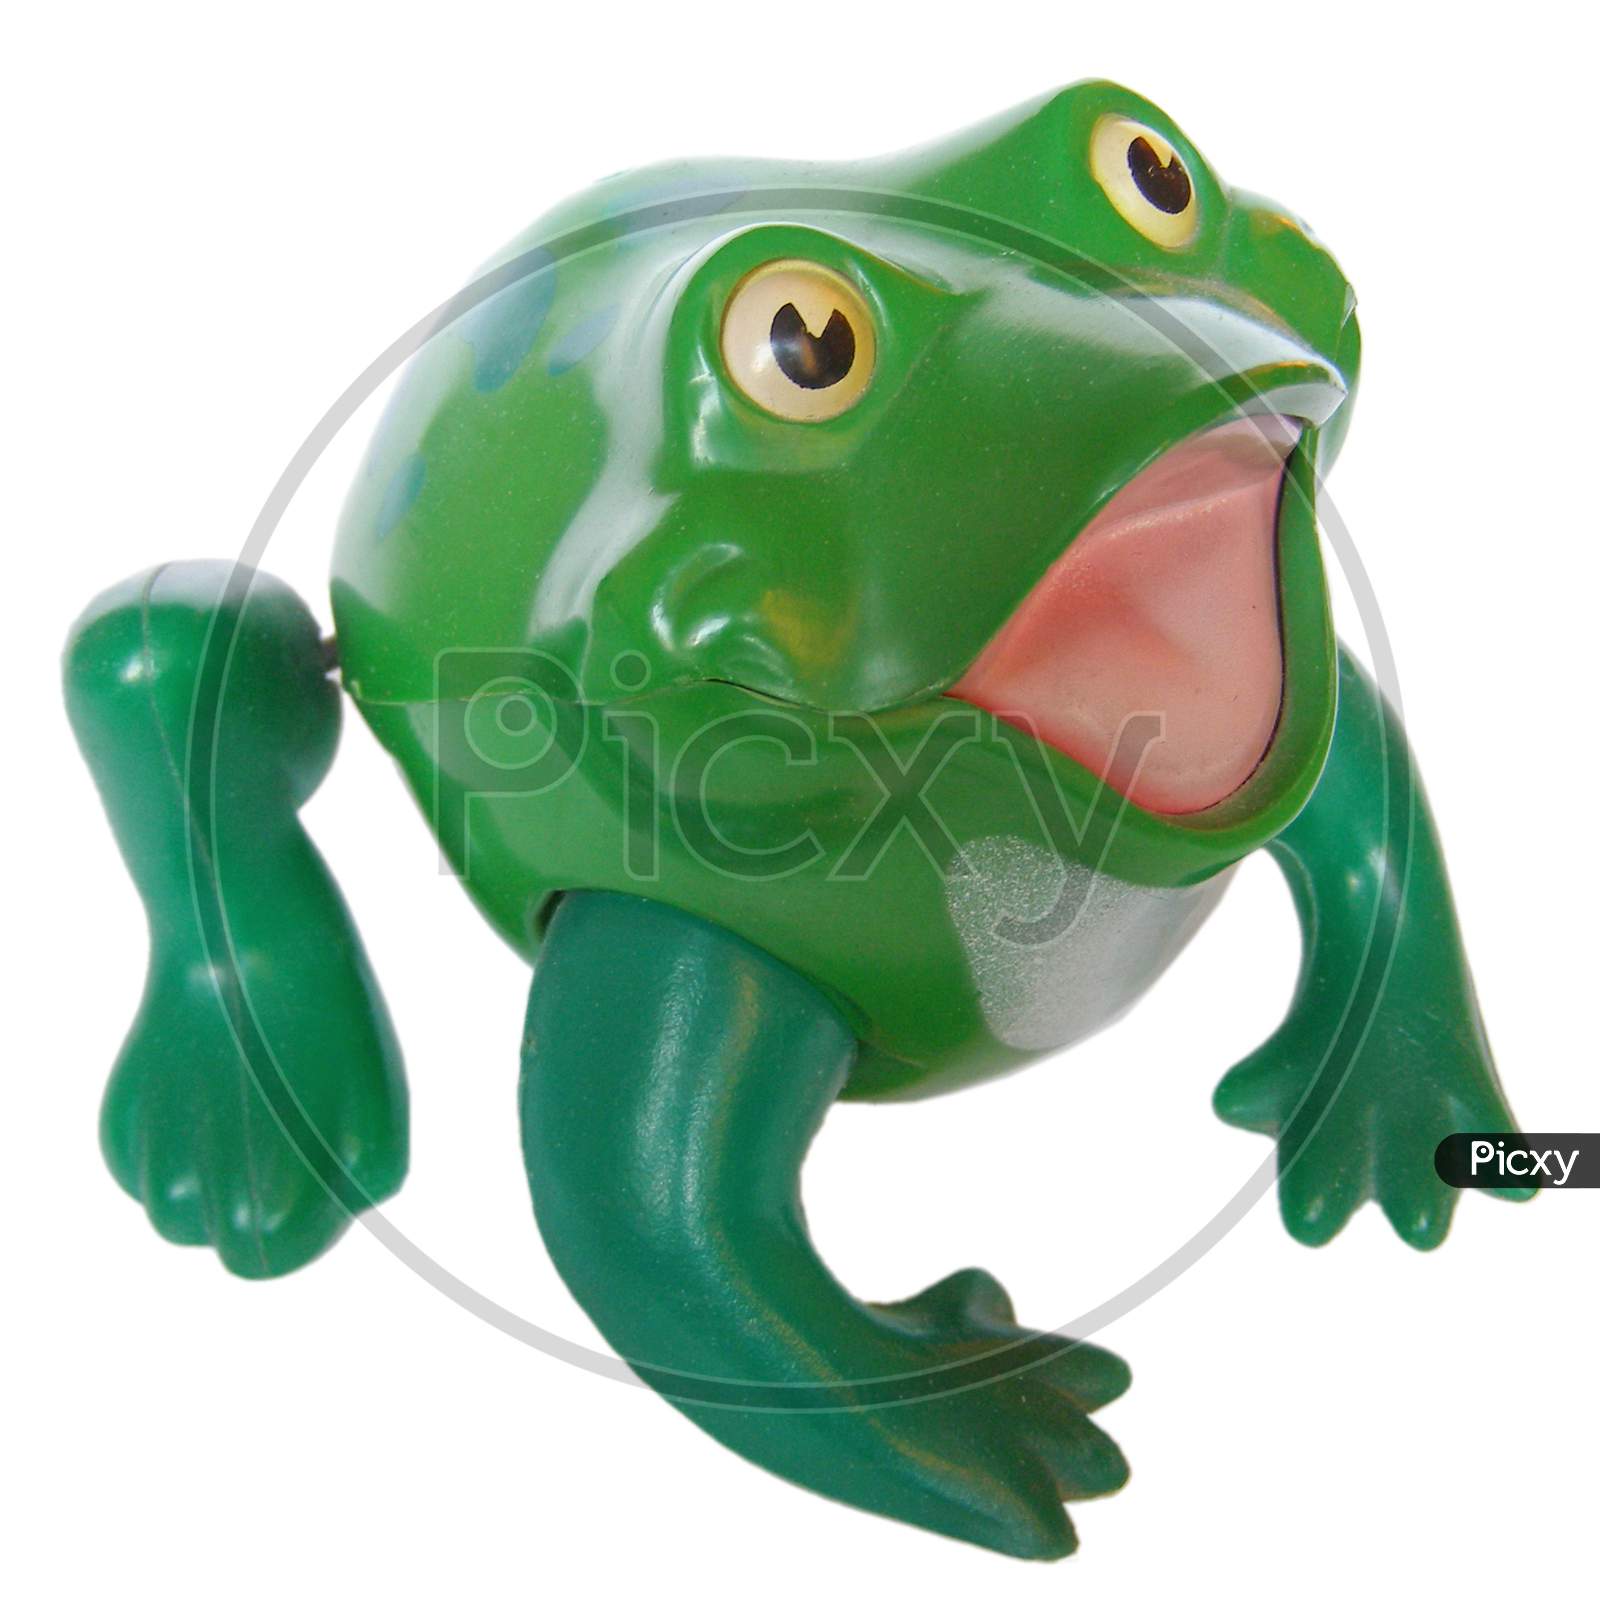 Toy Frog Isolated